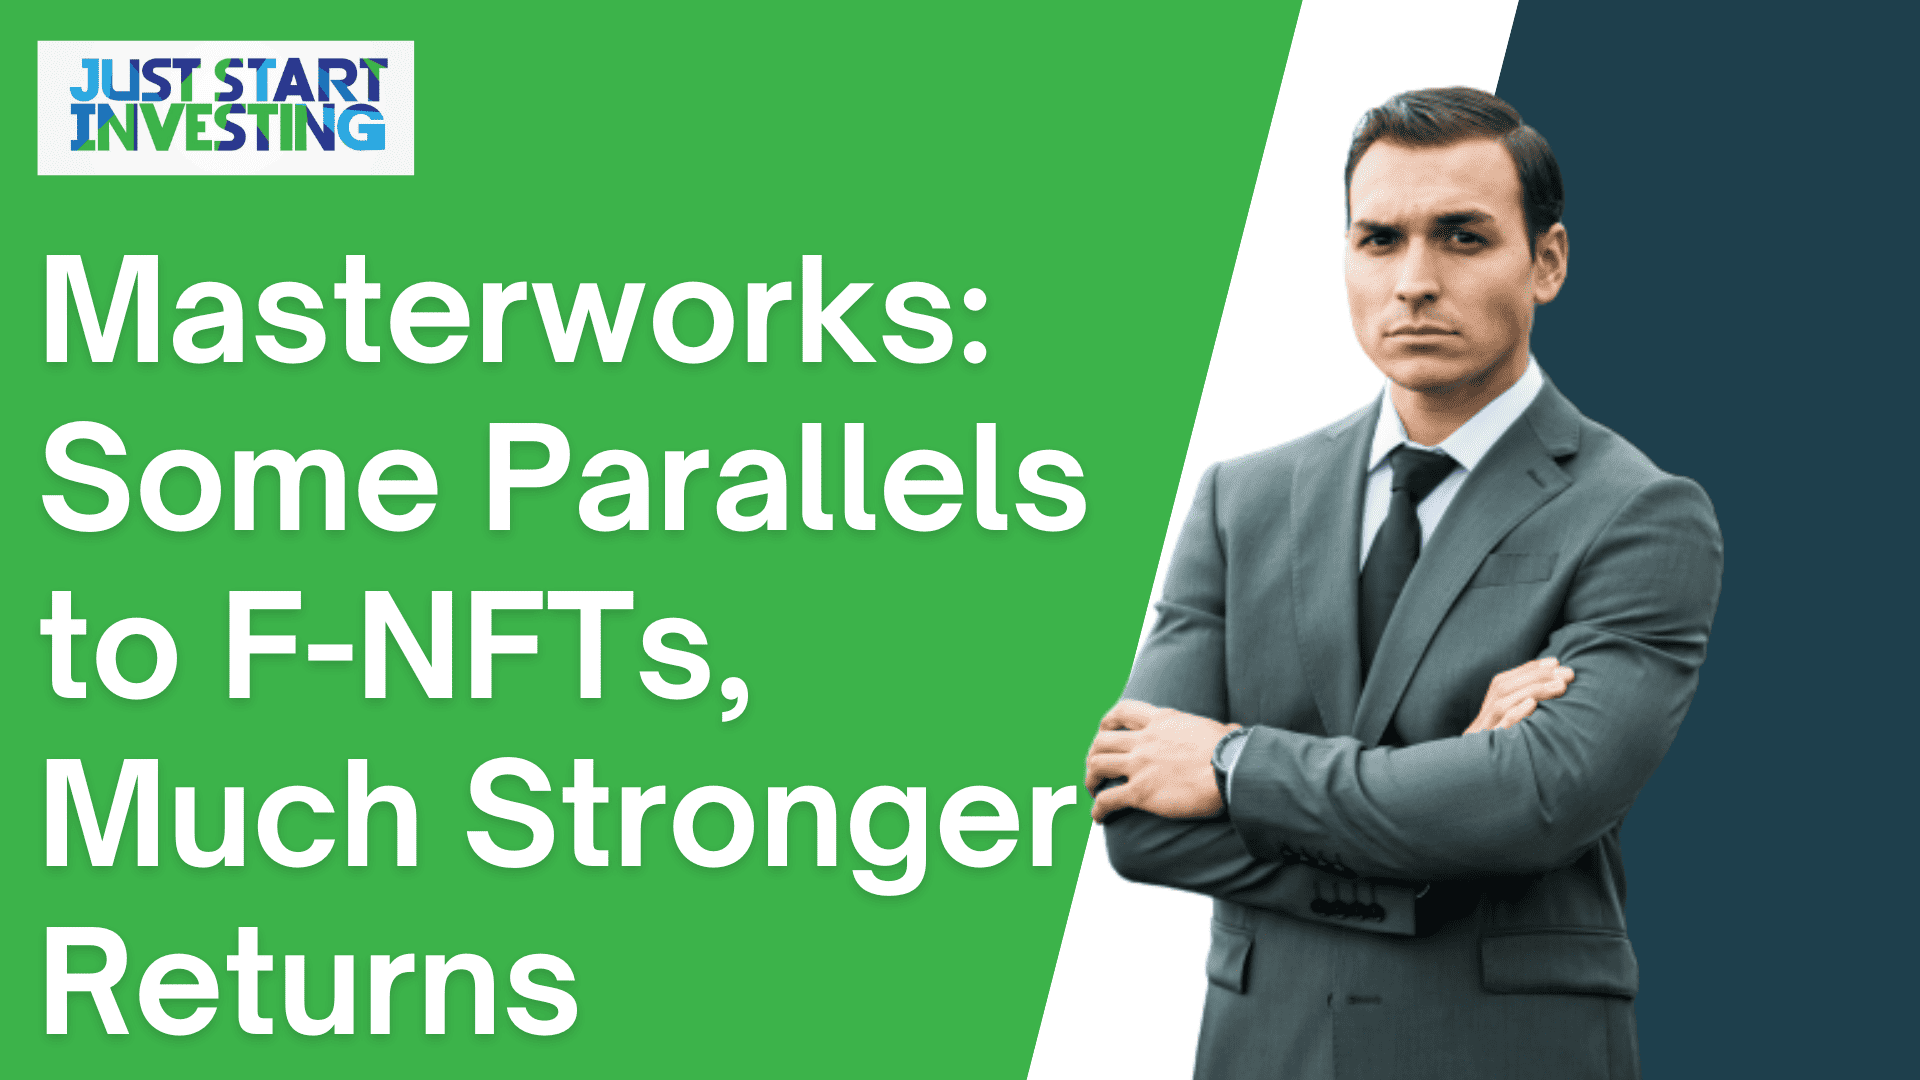 Masterworks - Some Parallels to F-NFTs, Much Stronger Returns